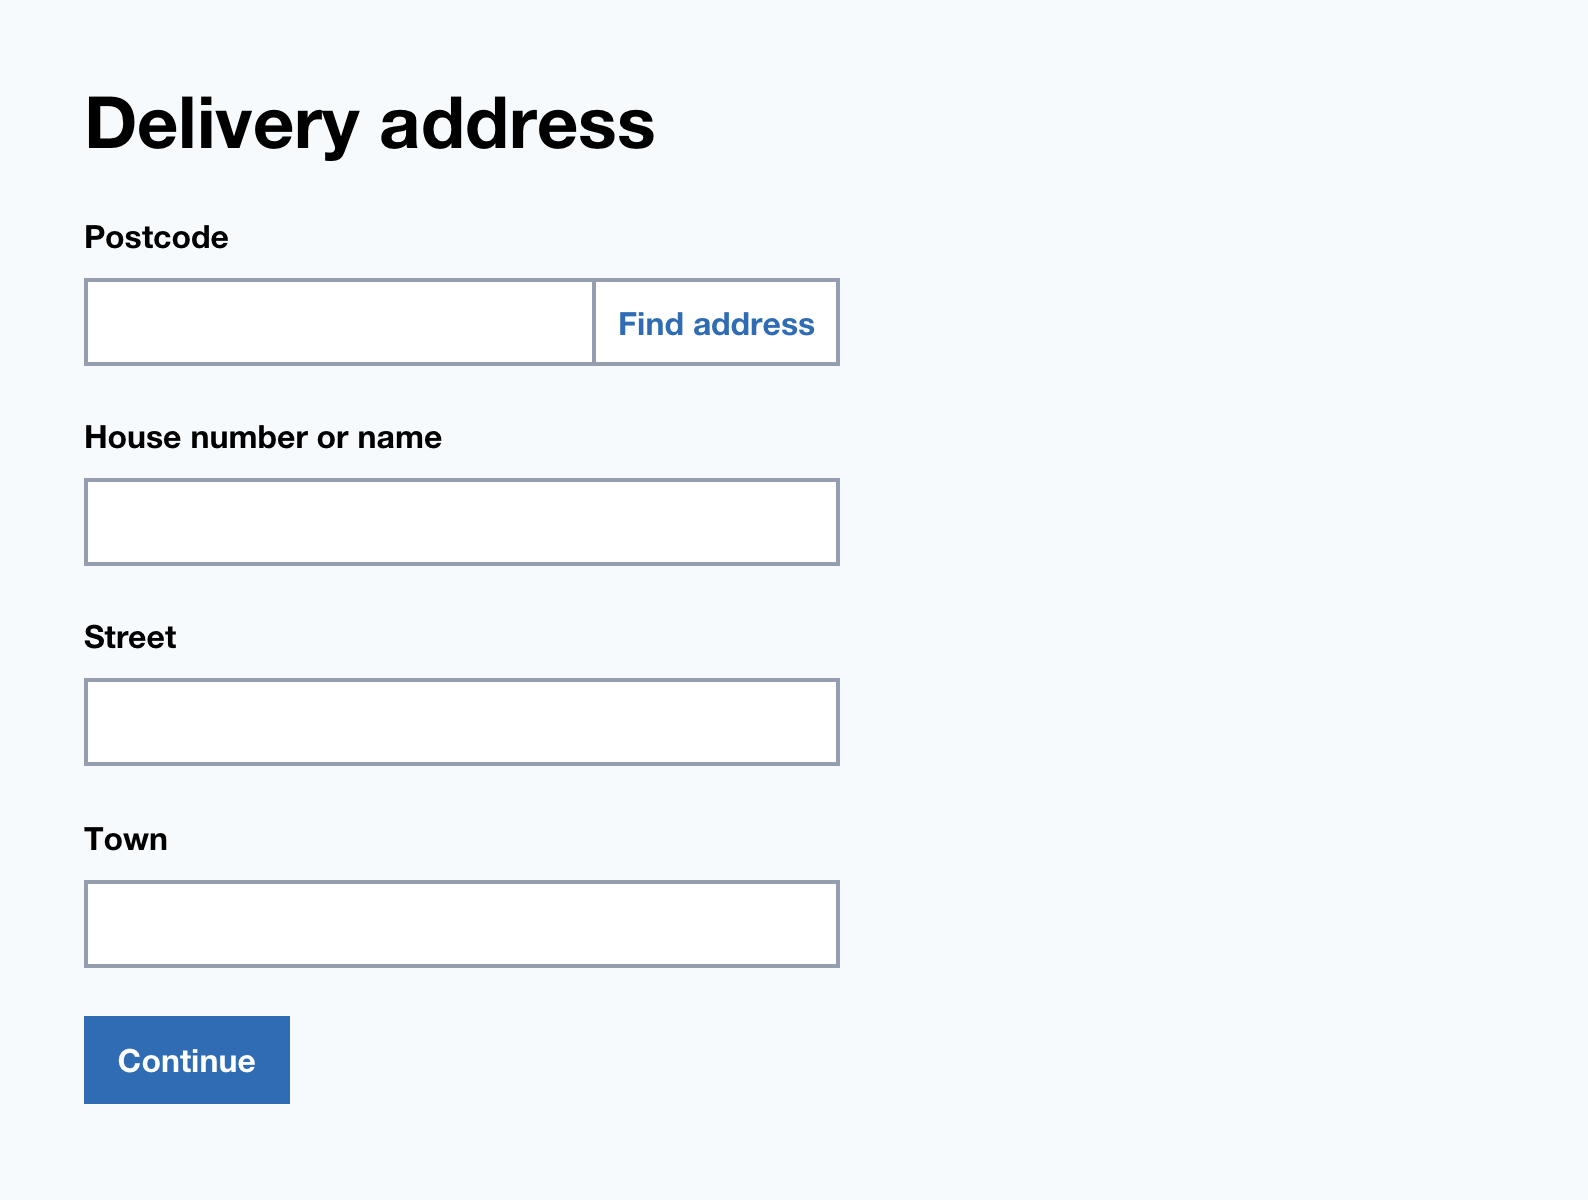 Delivery address form